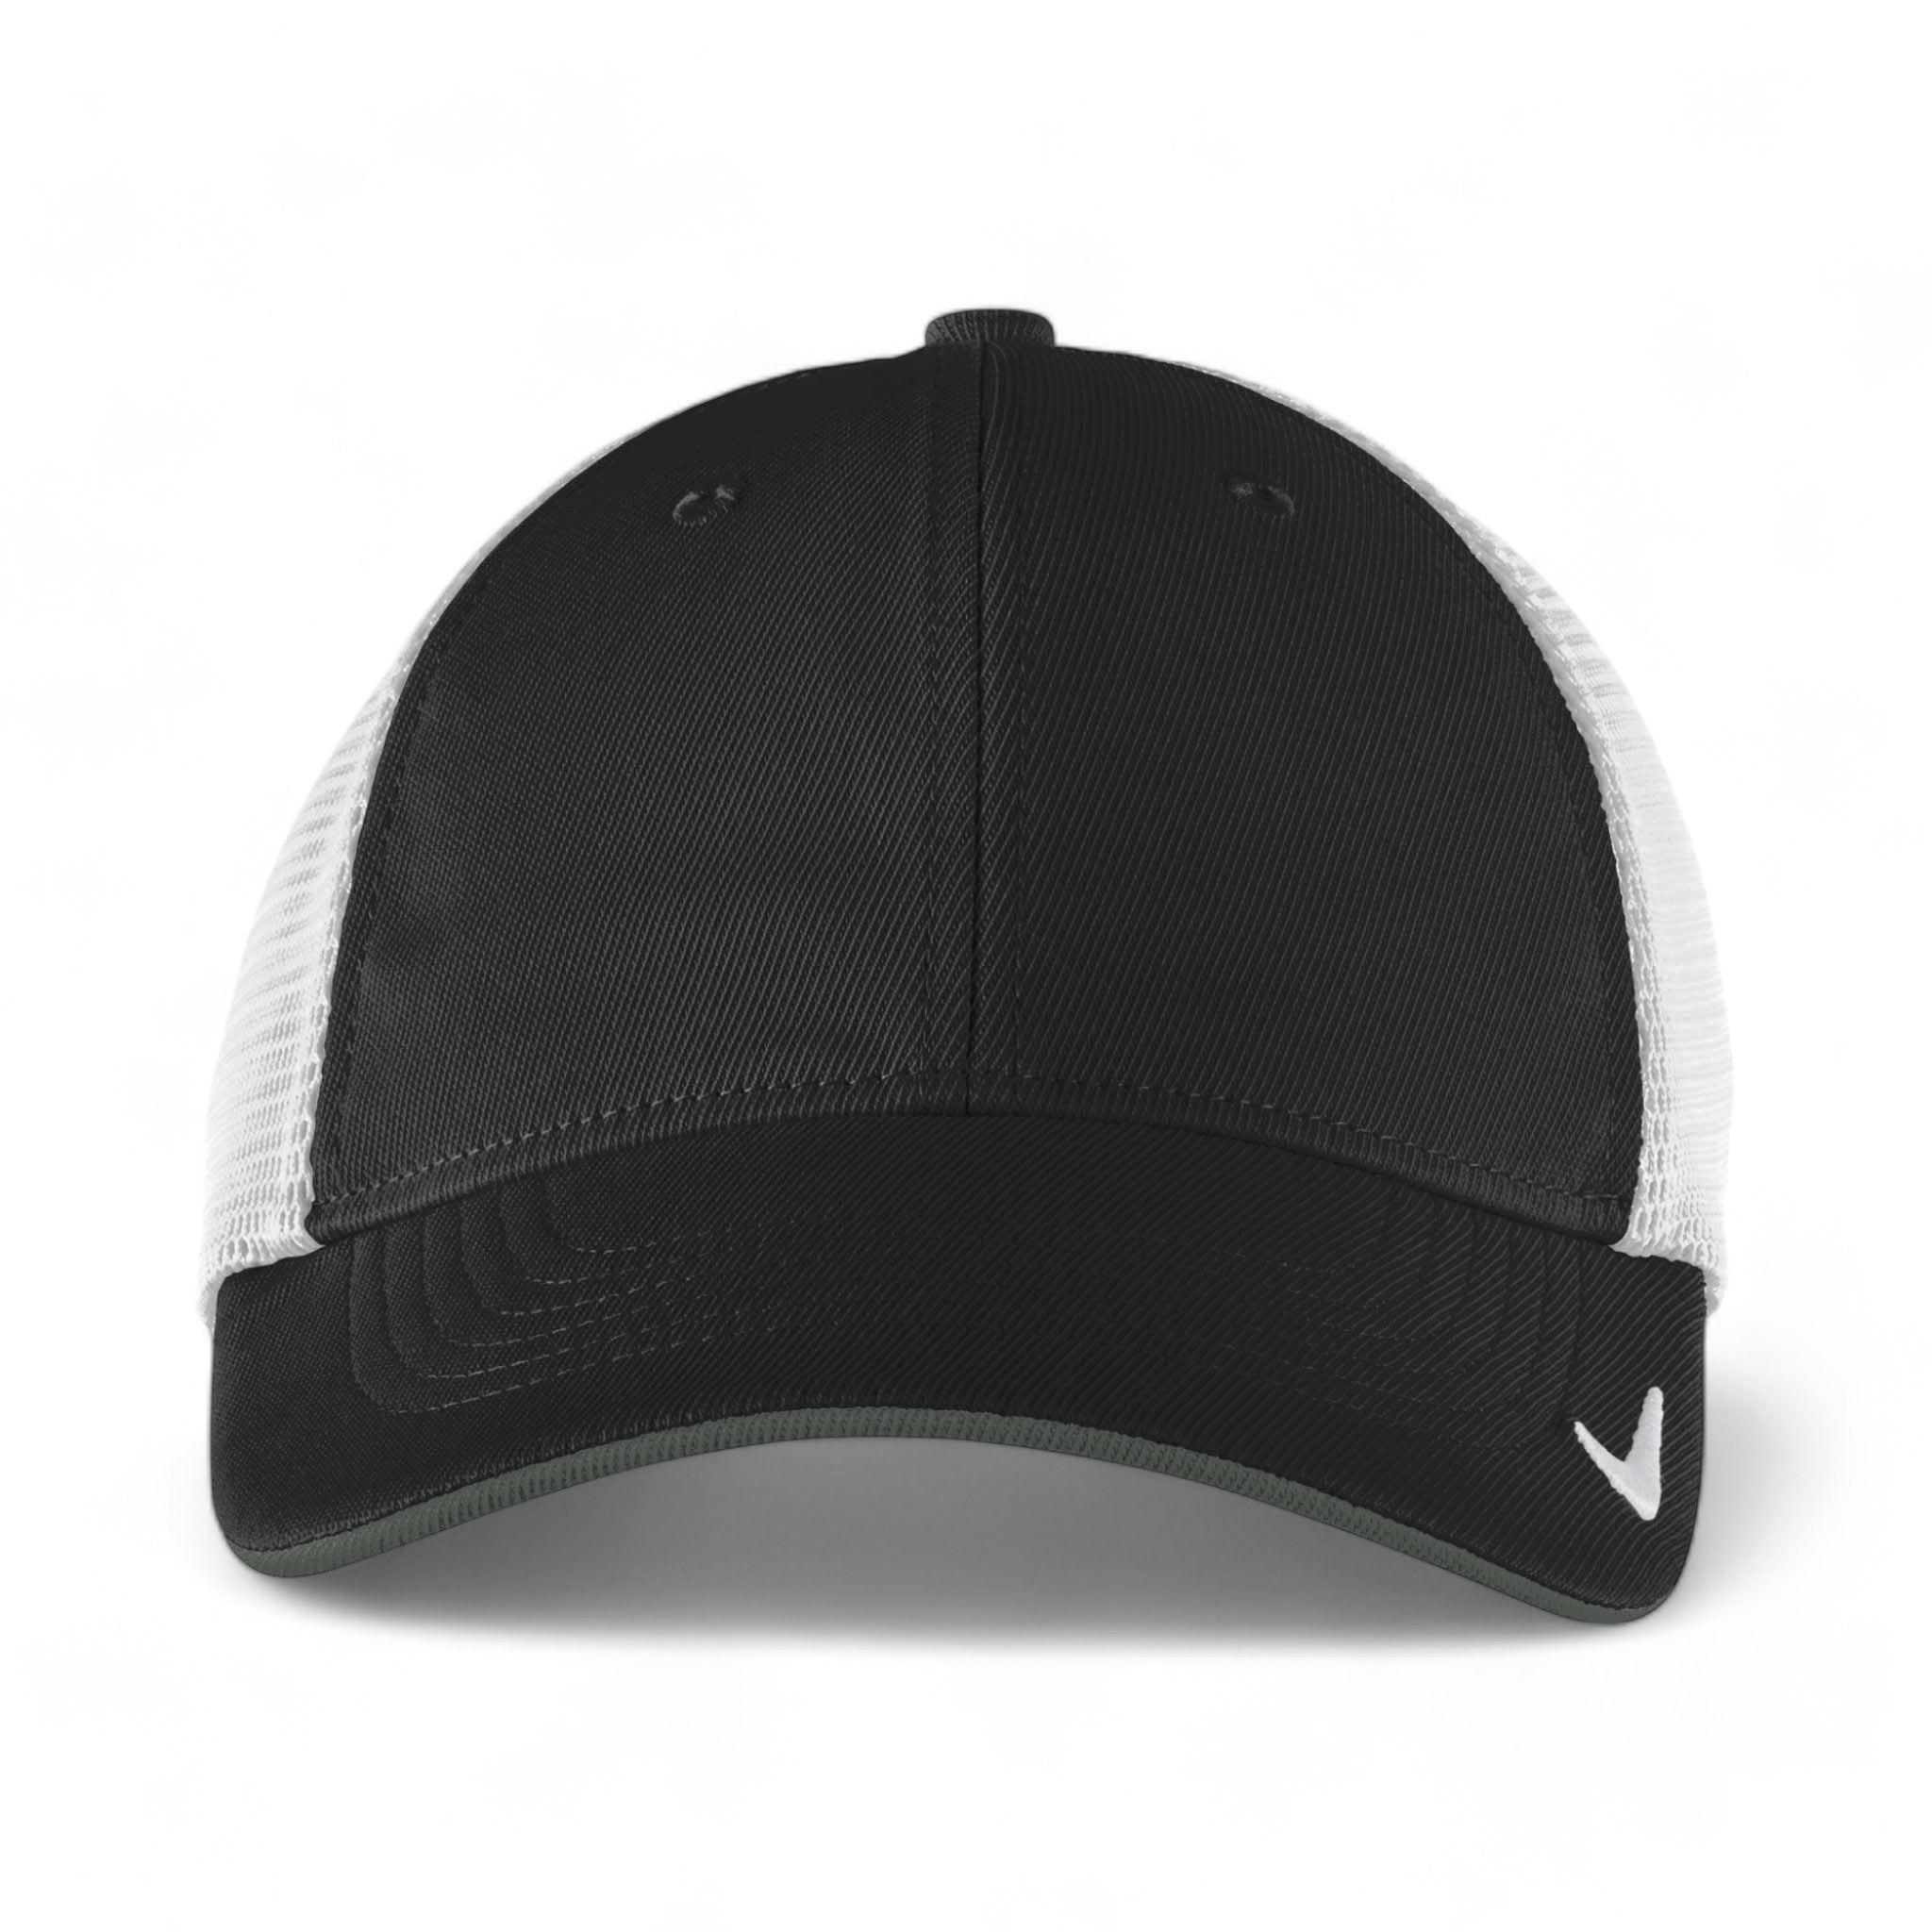 Front view of Nike NKFB6448 custom hat in black and white